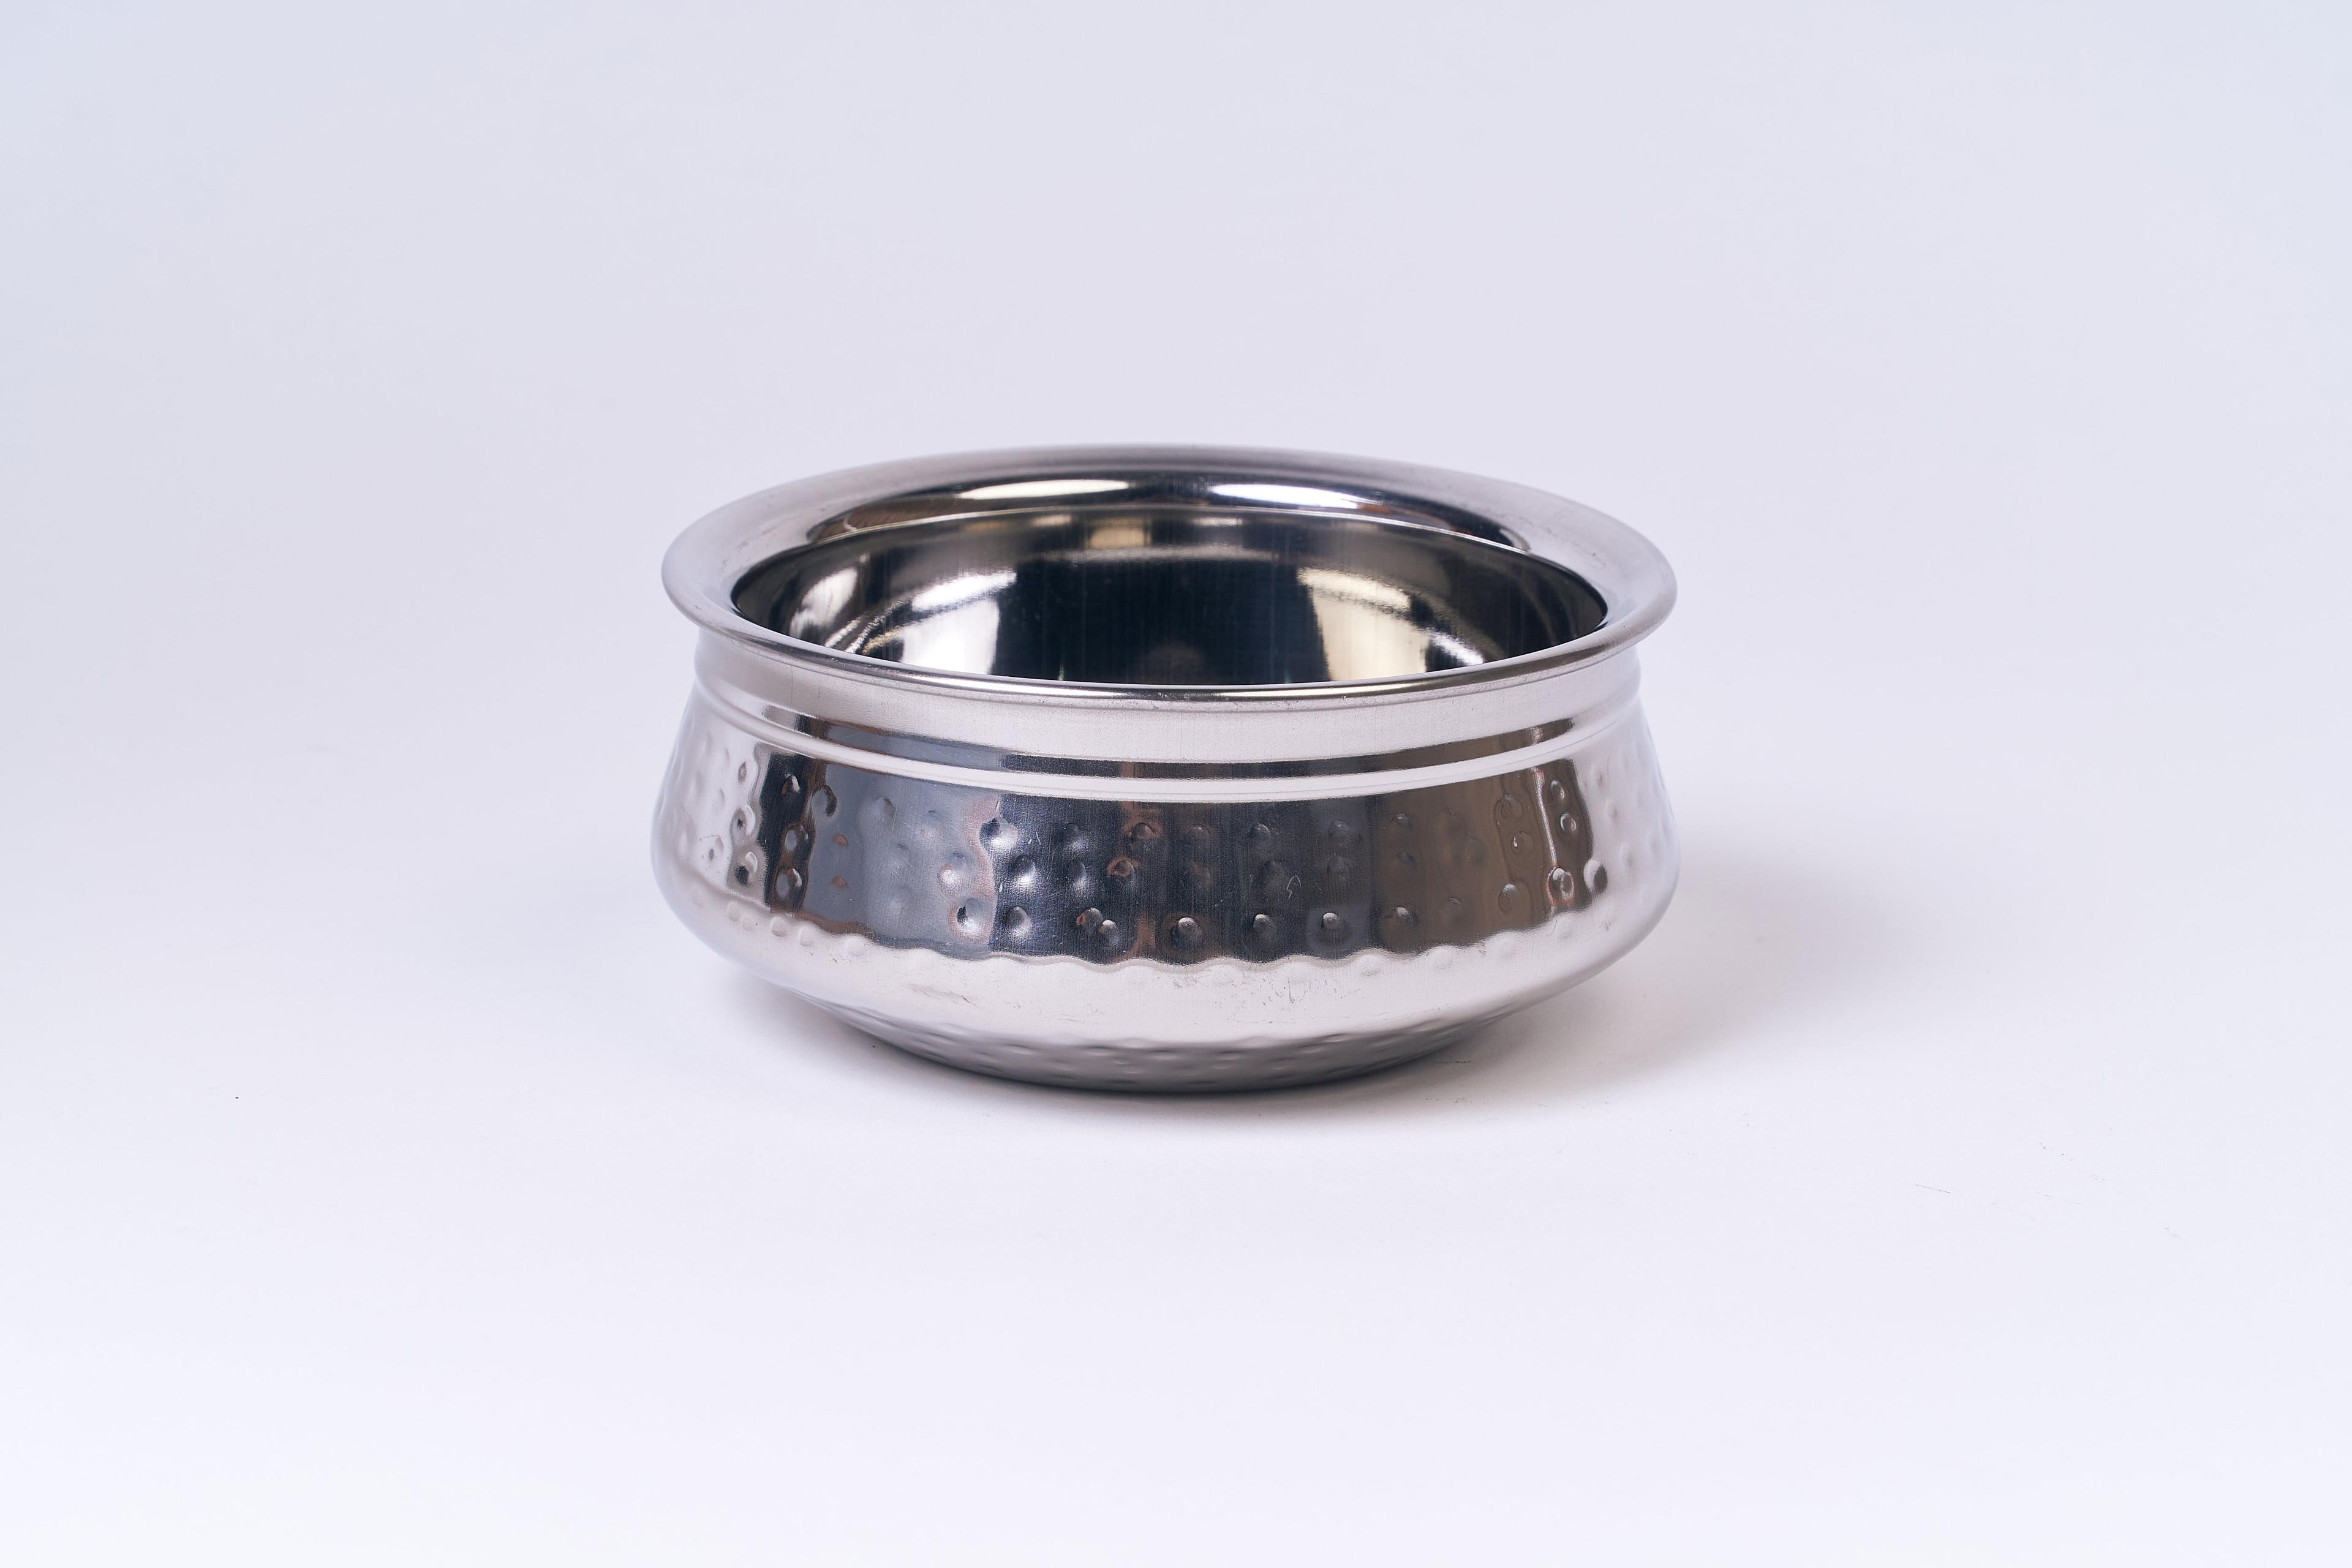 Stainless Steel Hammered Bowl #6